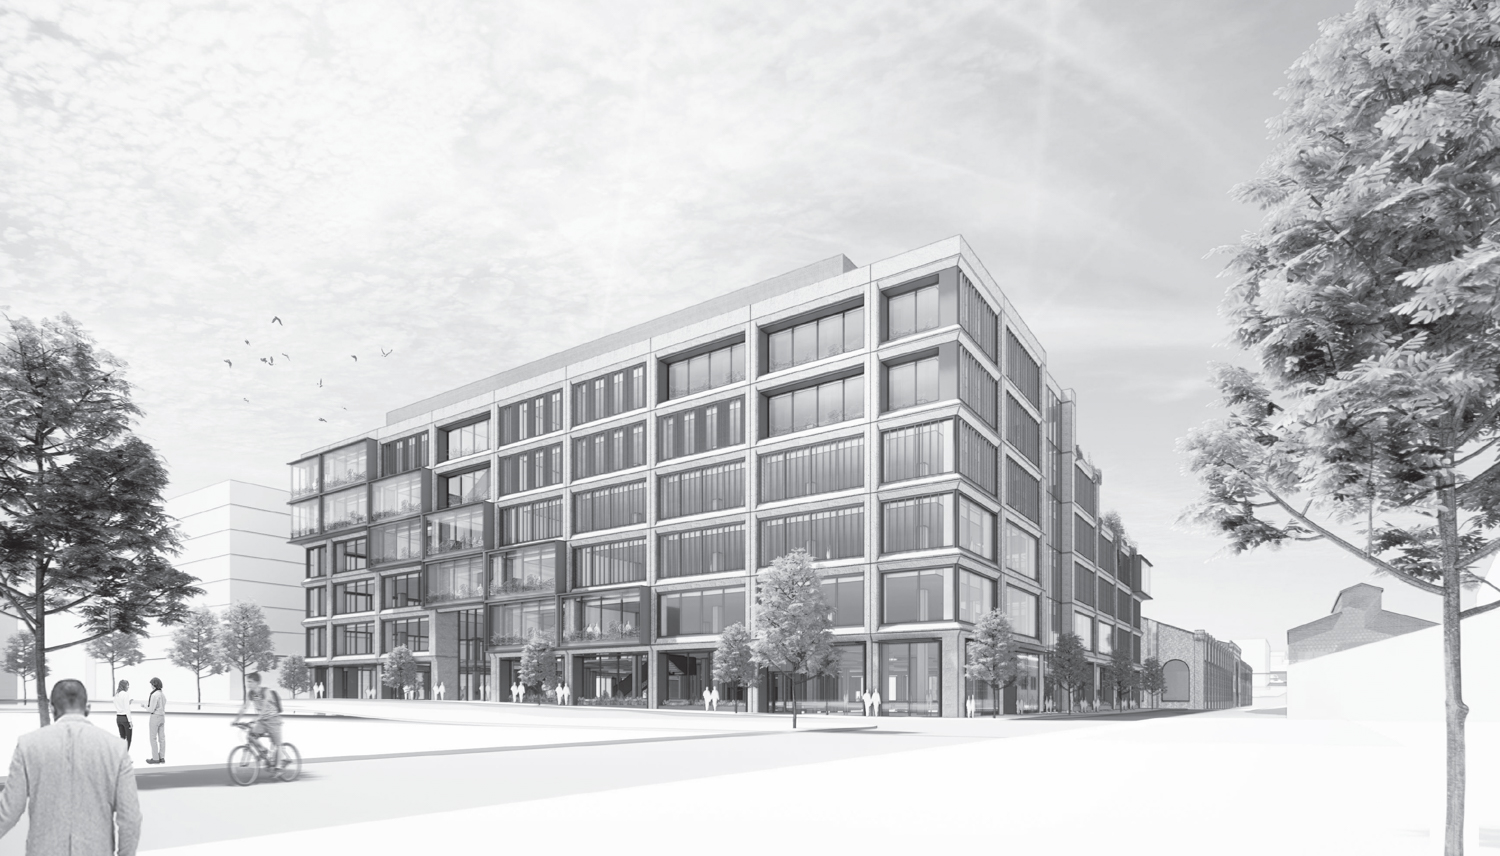 Pier 70's Parcel A at 88 Maryland Street, design by DES and Grimshaw